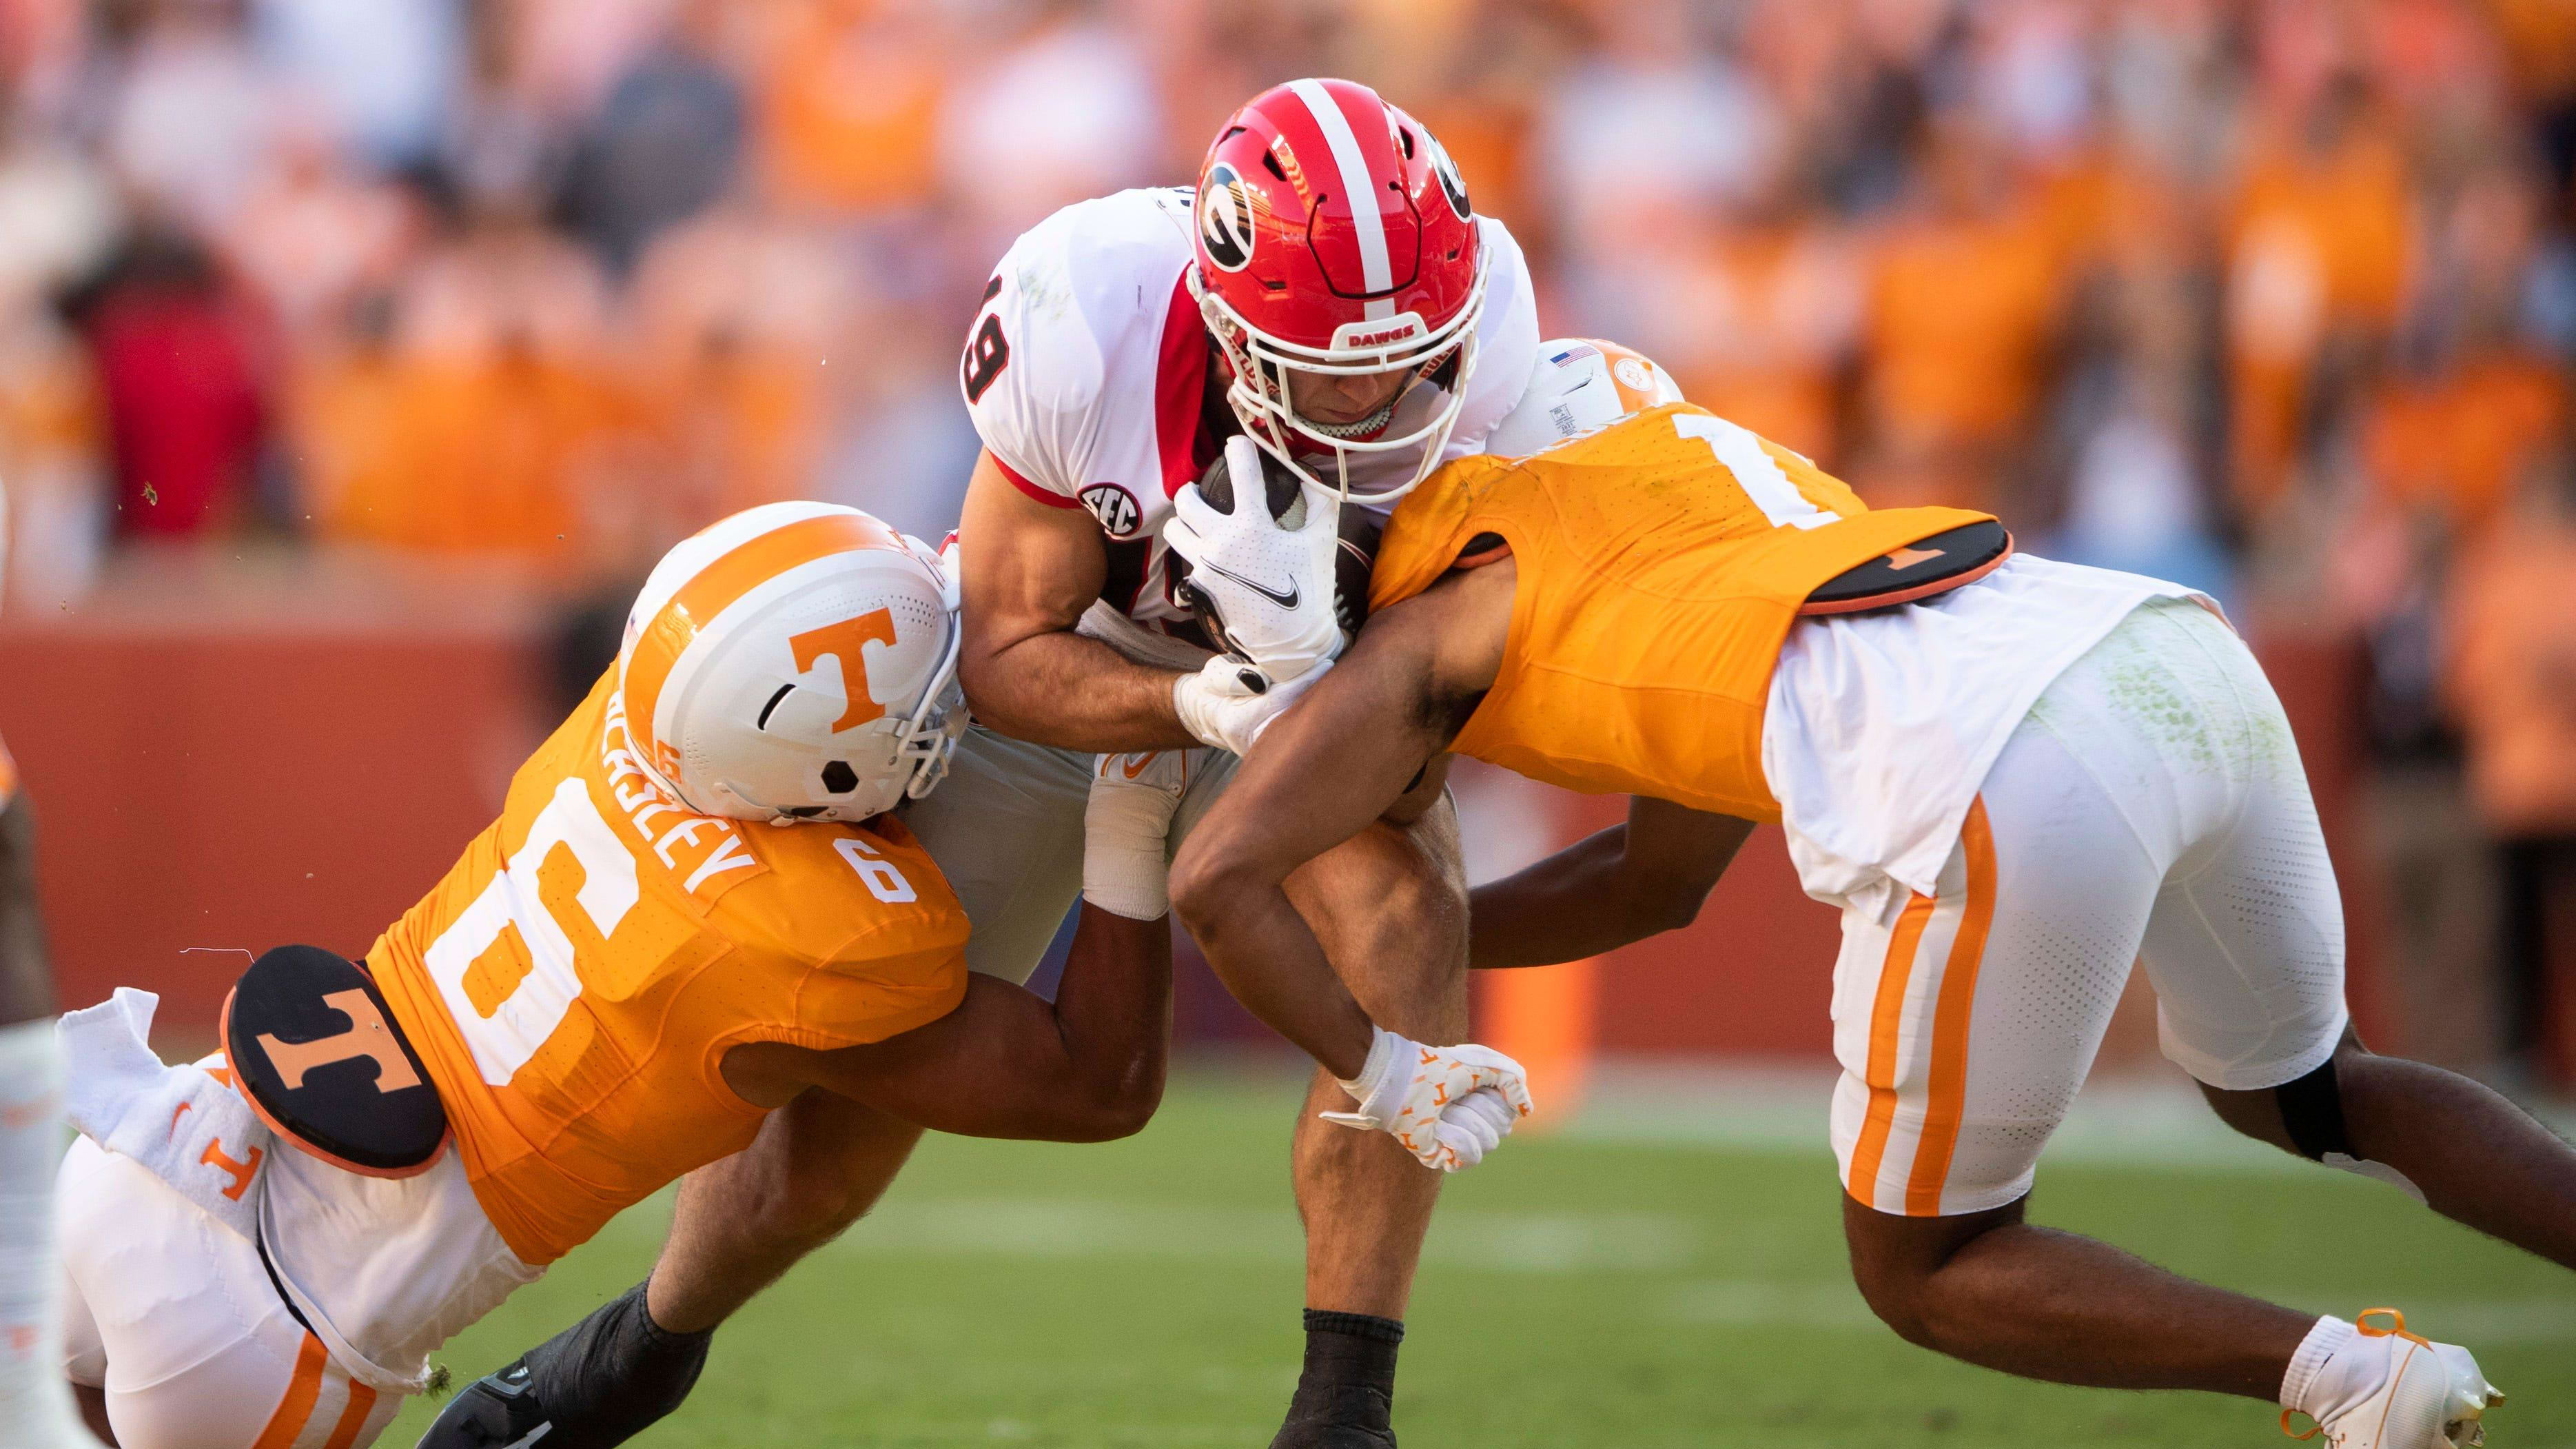 Georgia tight end Brock Bowers (19) is tackled by Tennessee linebacker Aaron Beasley (6).